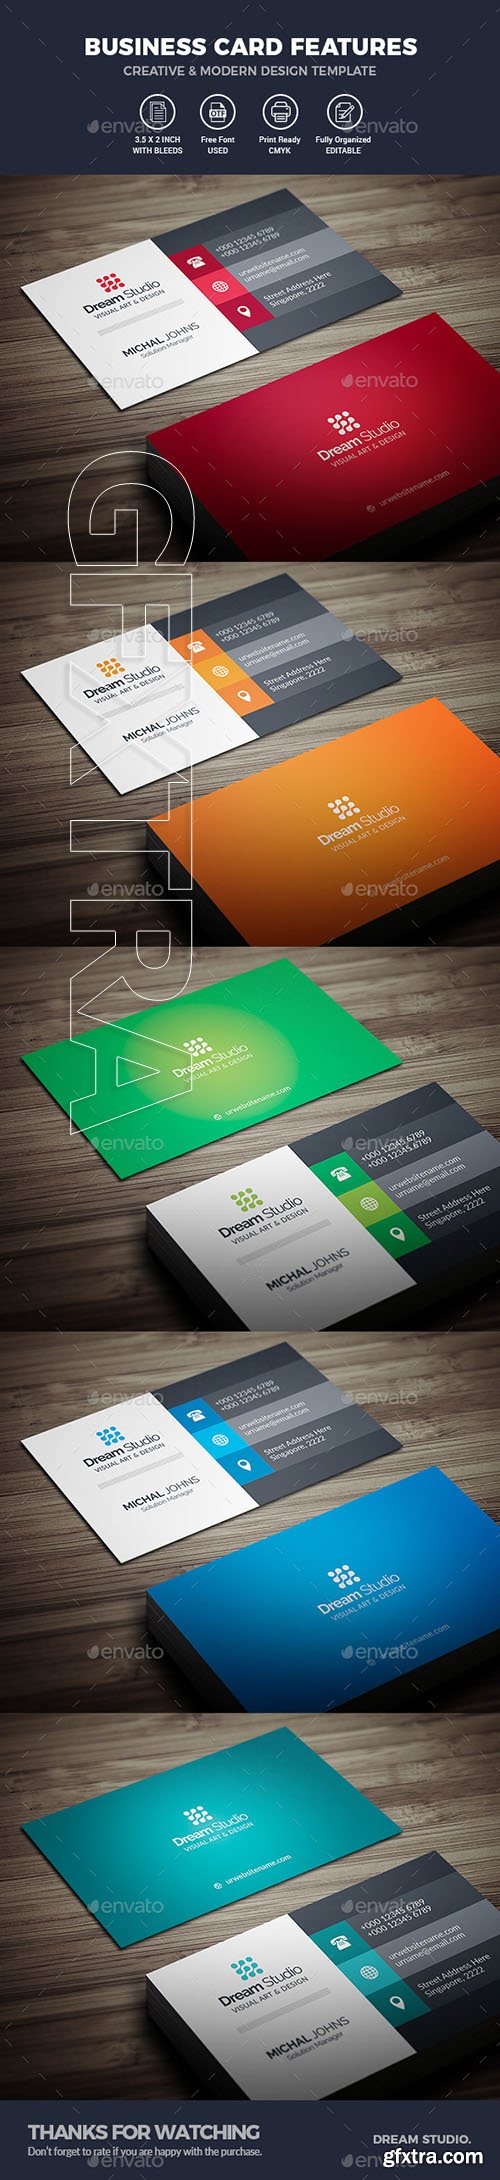 GraphicRiver - Business Cards 21254283